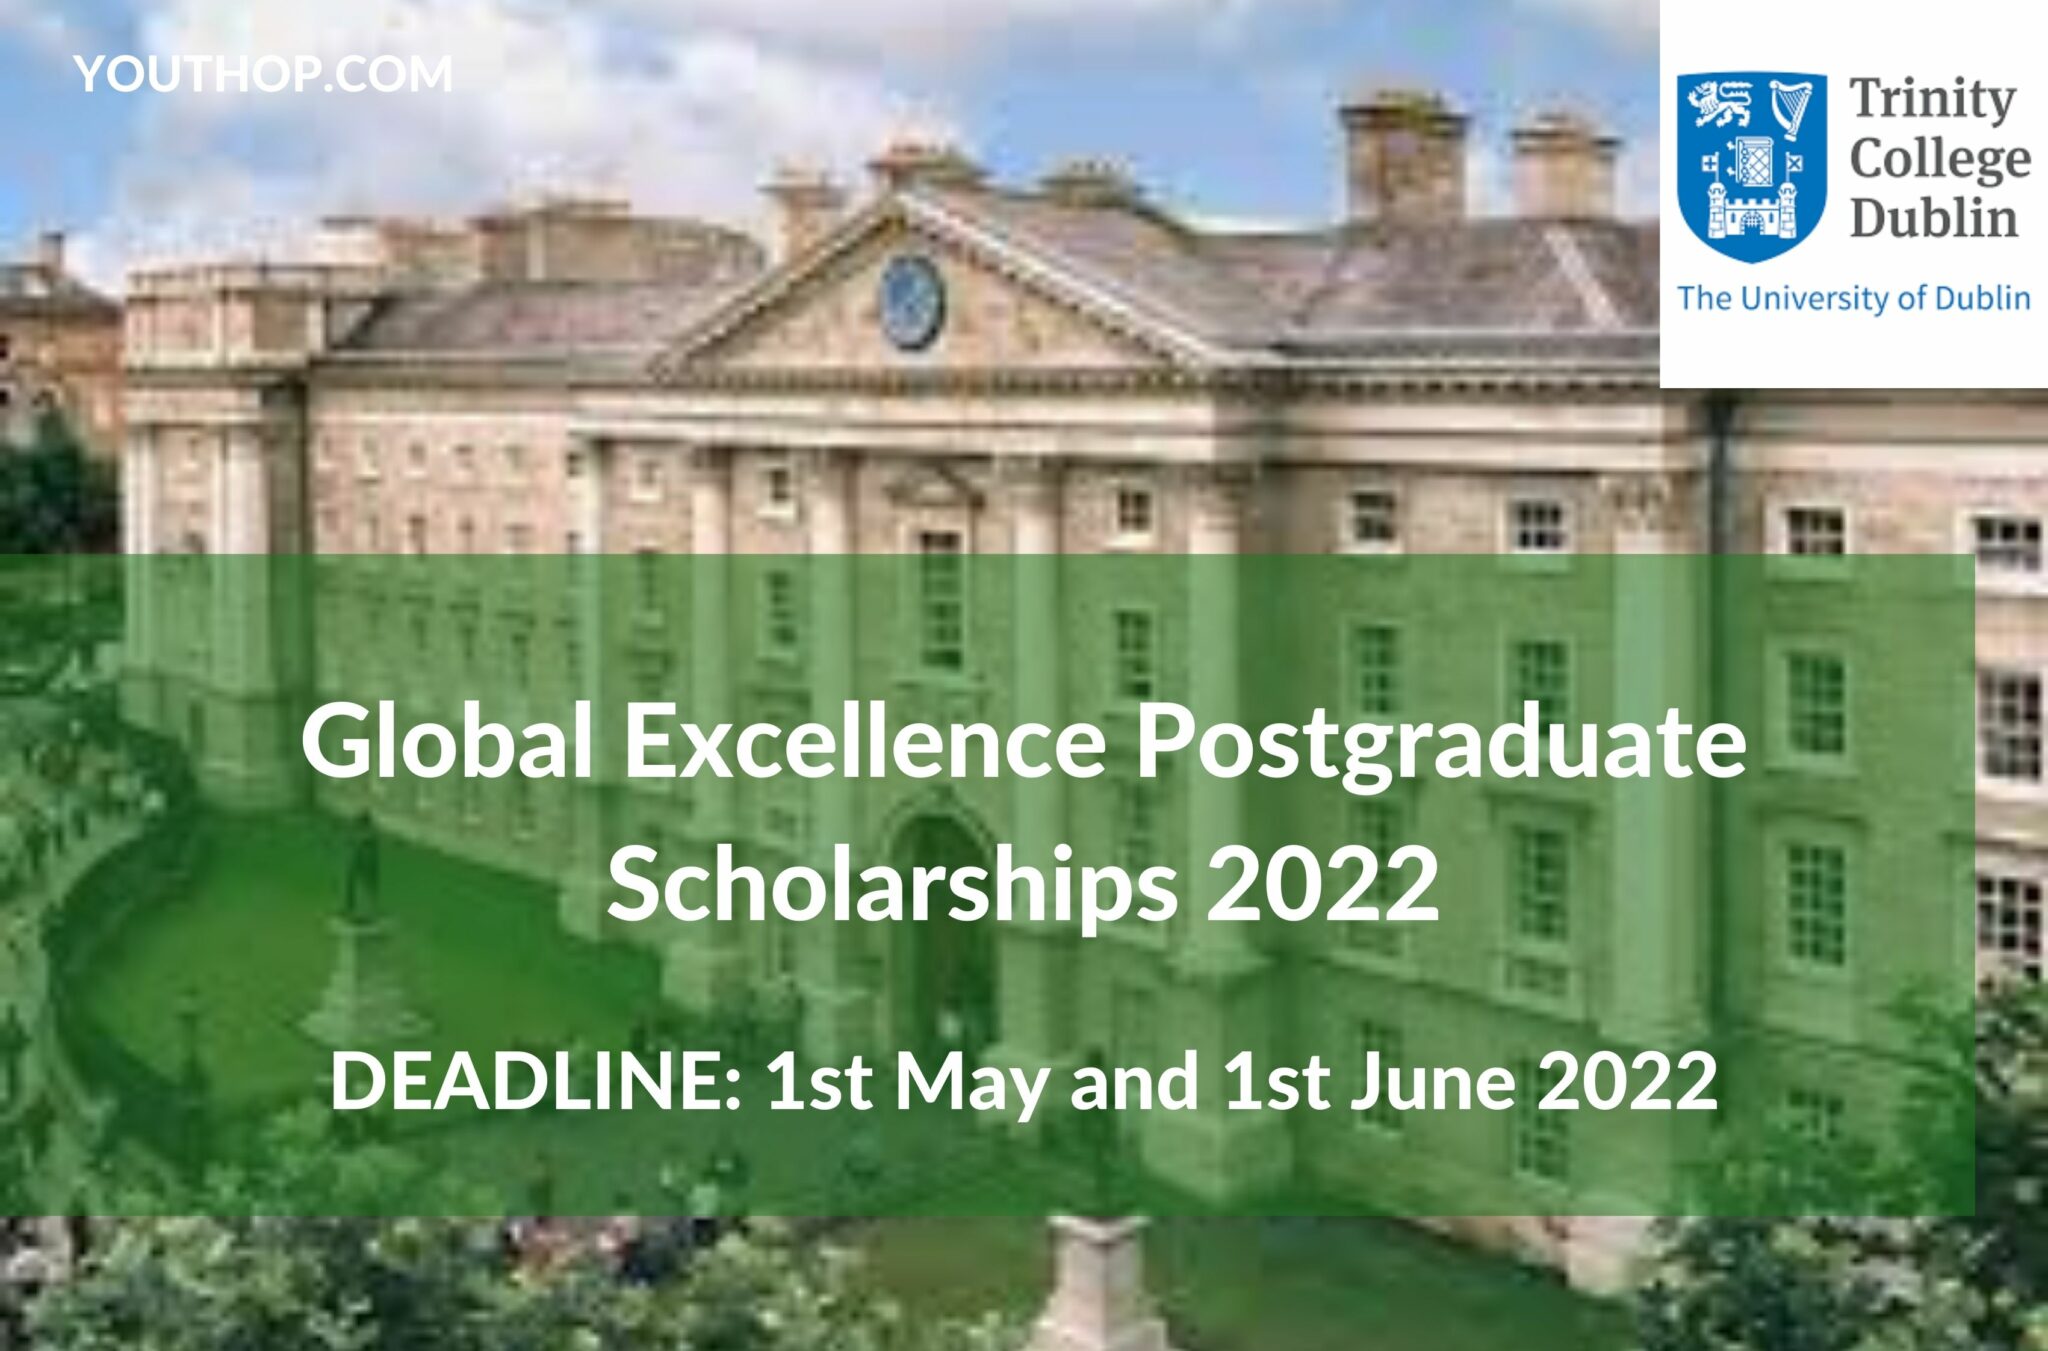 Global Excellence Postgraduate Scholarships 2022 - Youth Opportunities